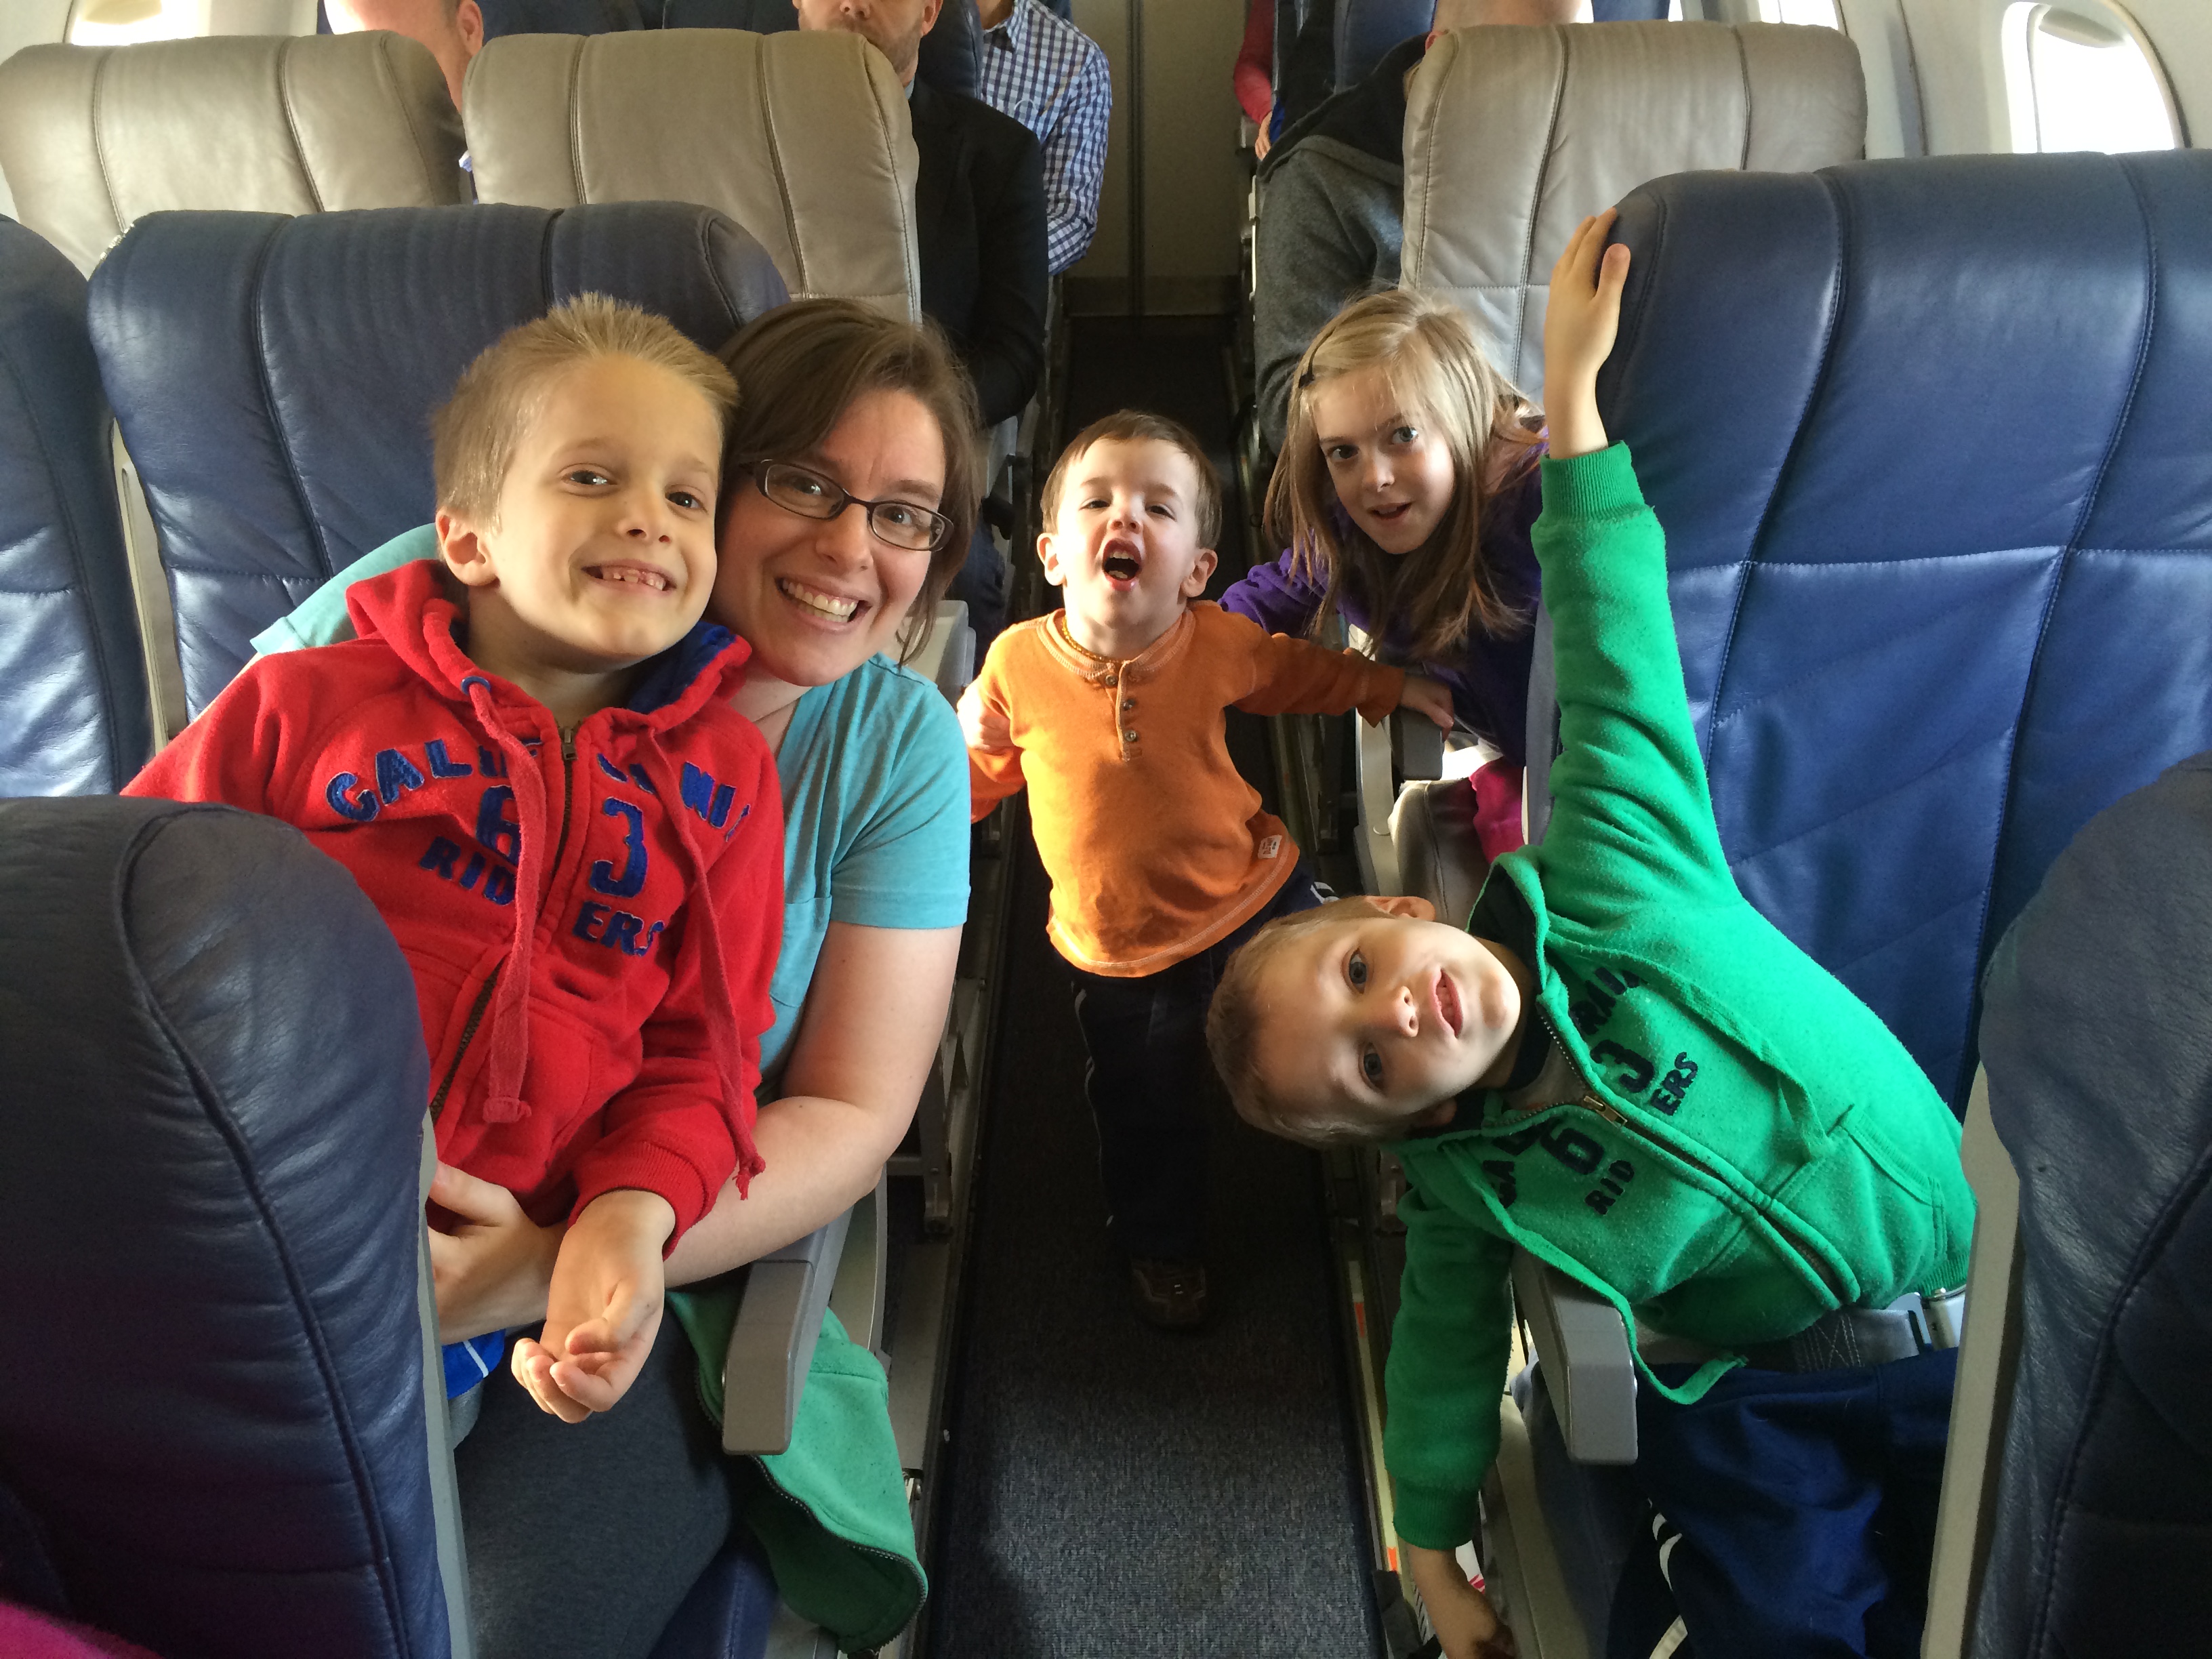 Long Flight with Children: How to Enjoy a Long Flight with Kids